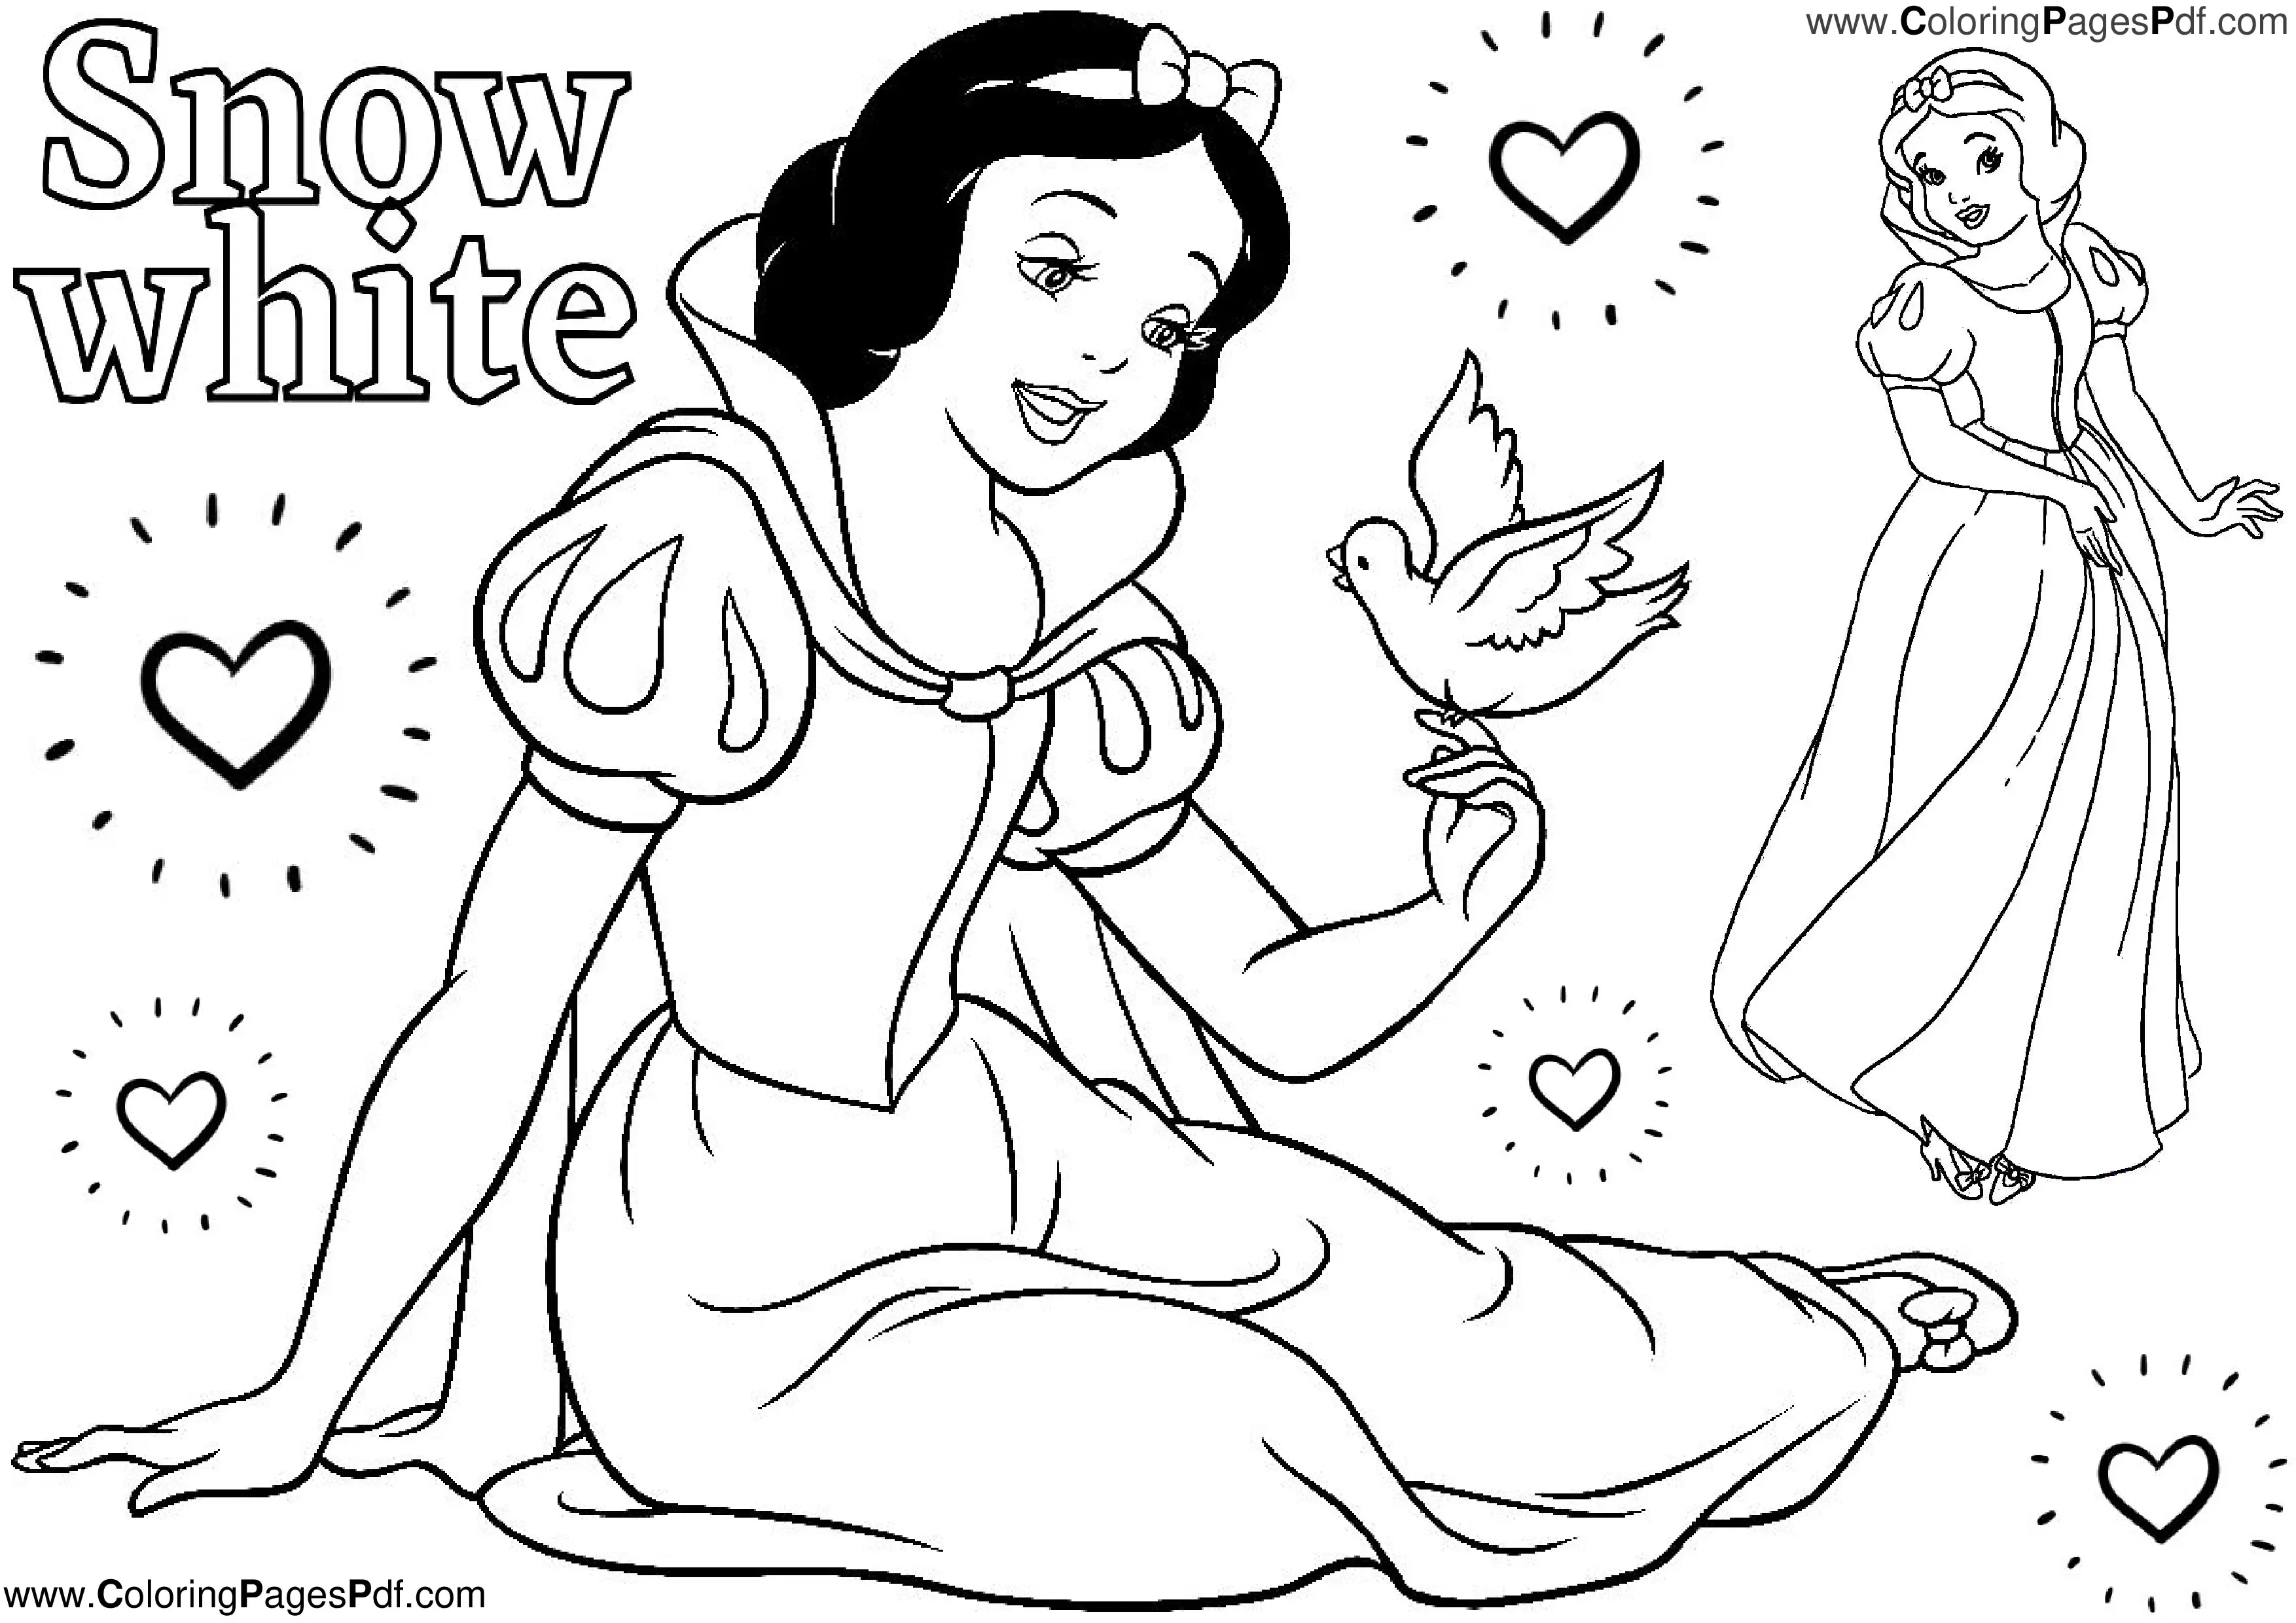 Snow white mermaid coloring pages